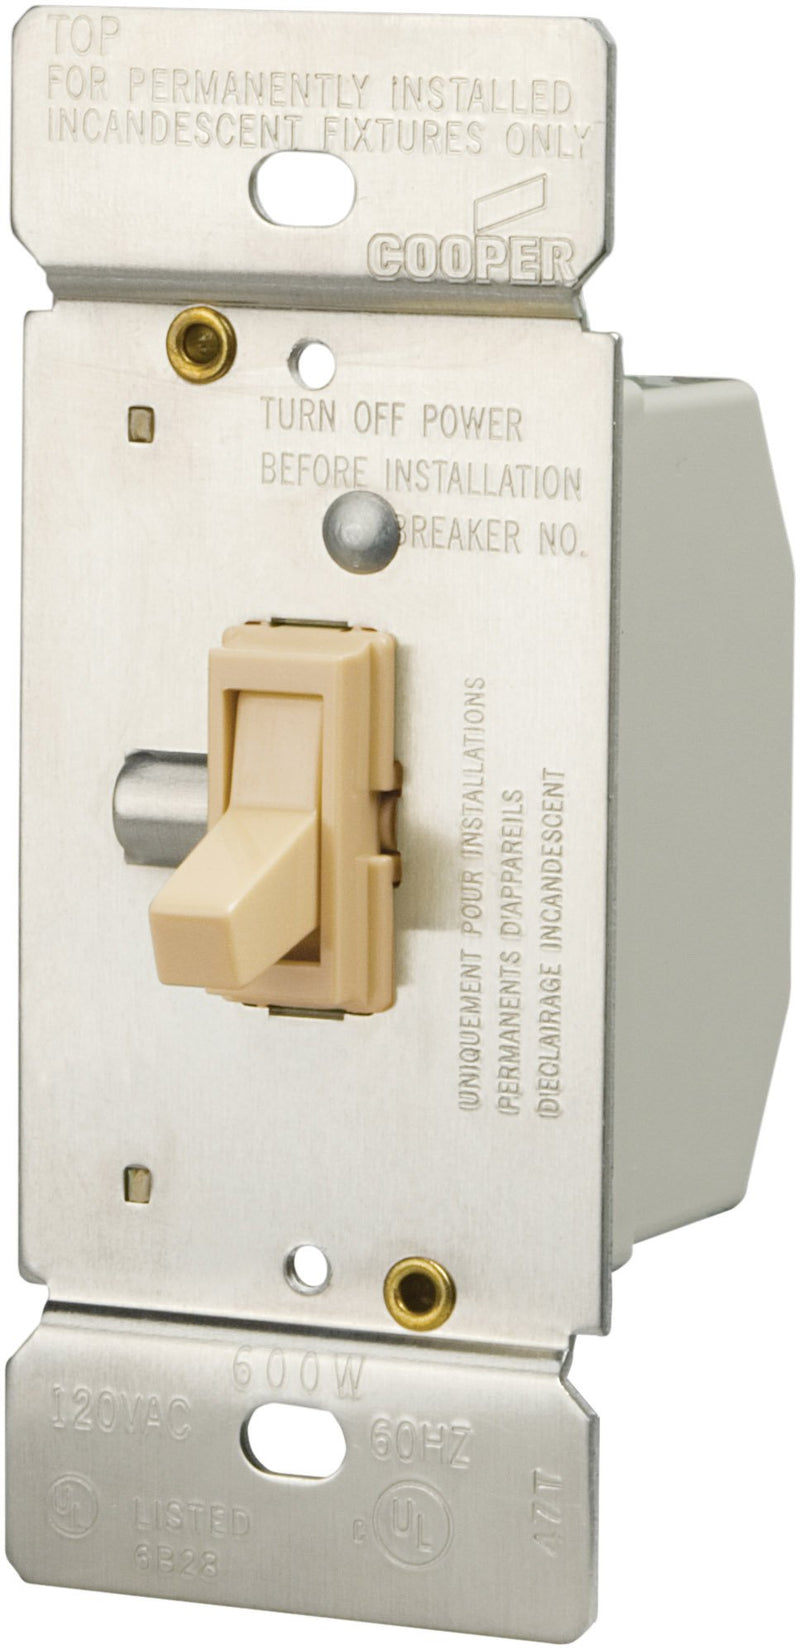 Cooper Wiring TI306-V-K 3-Way Toggle Dimmer With Knob- Ivory